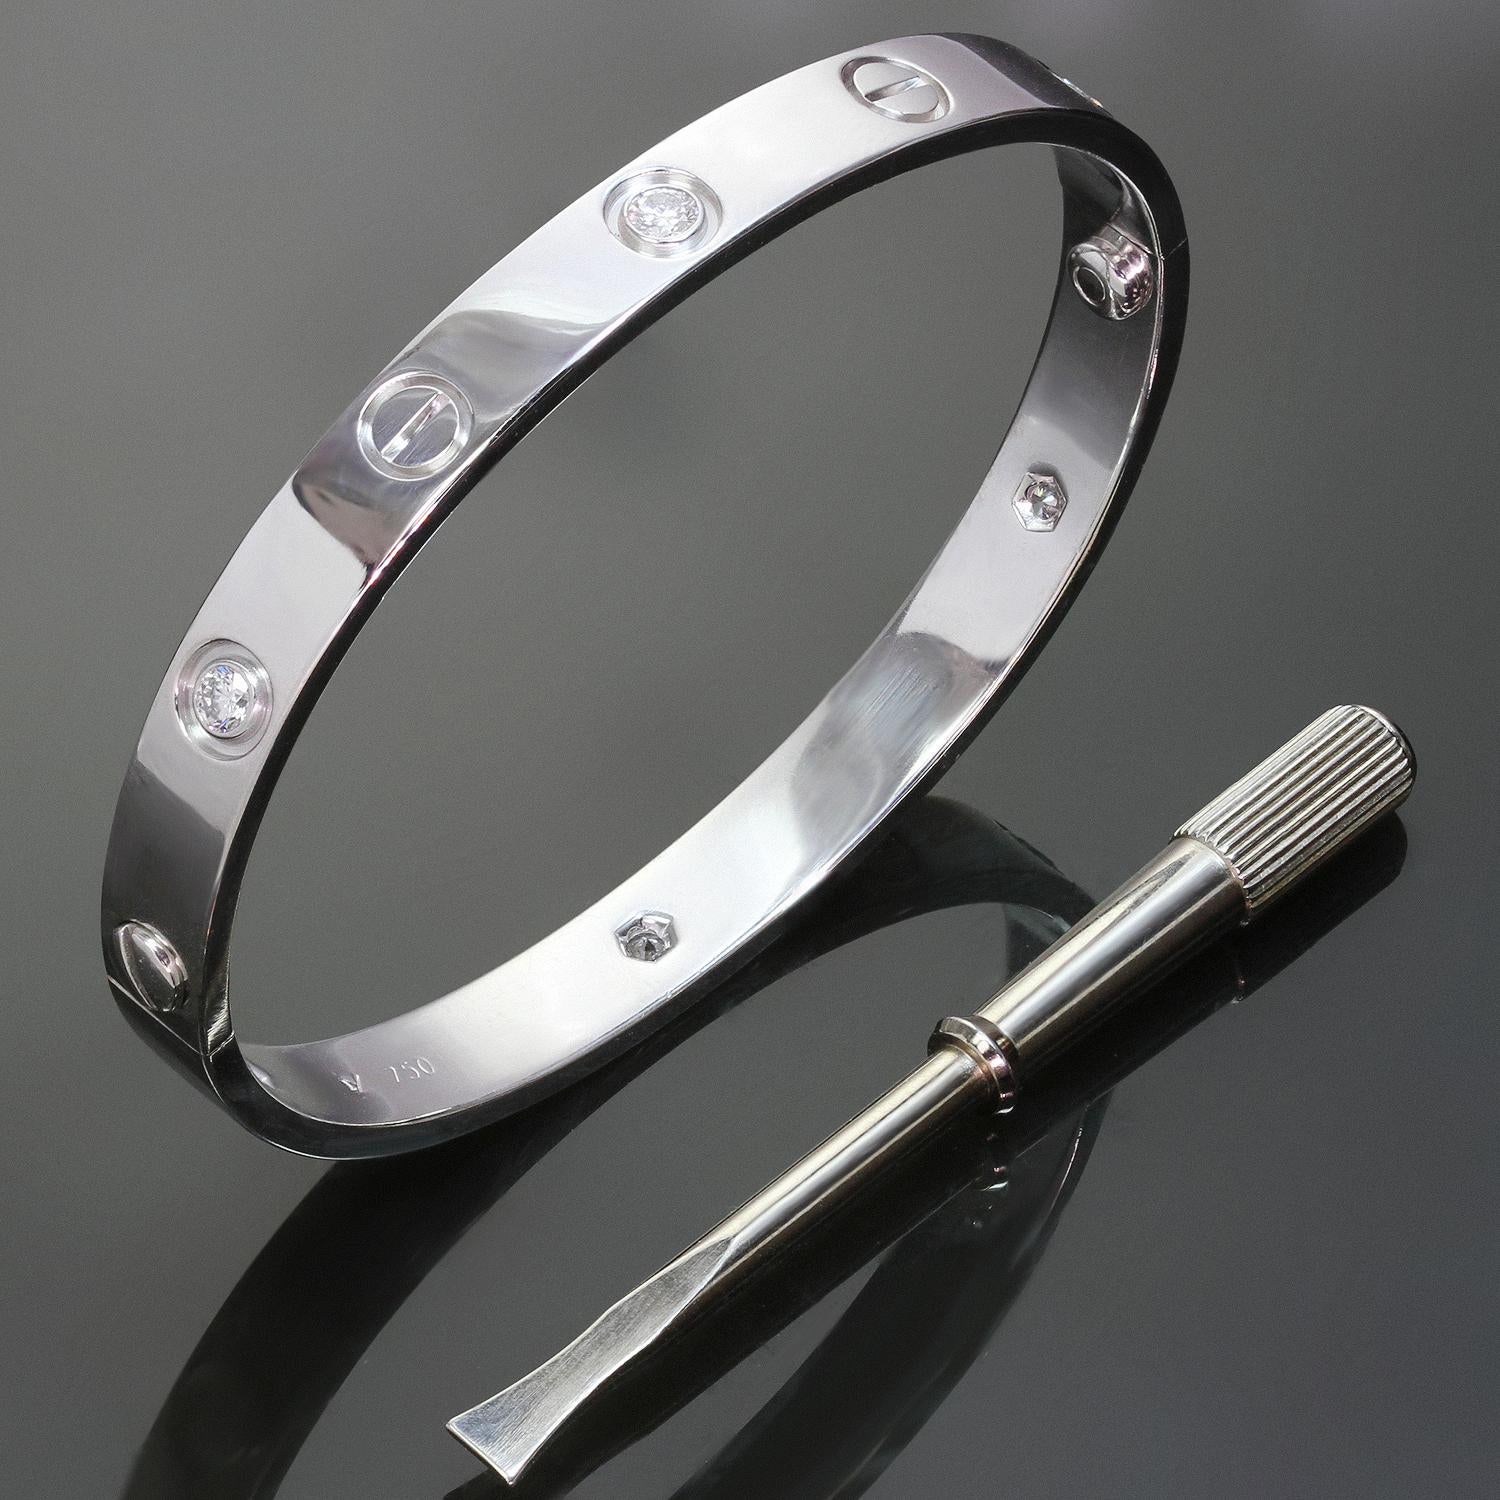 This iconic and timeless bracelet from Cartier's Love collection is crafted in 18k white gold and set with 4 round brilliant D-E-F VVS1-VVS2 diamonds weighing an estimated 0.40 carats. Completed with the original Cartier screwdriver. This bangle is